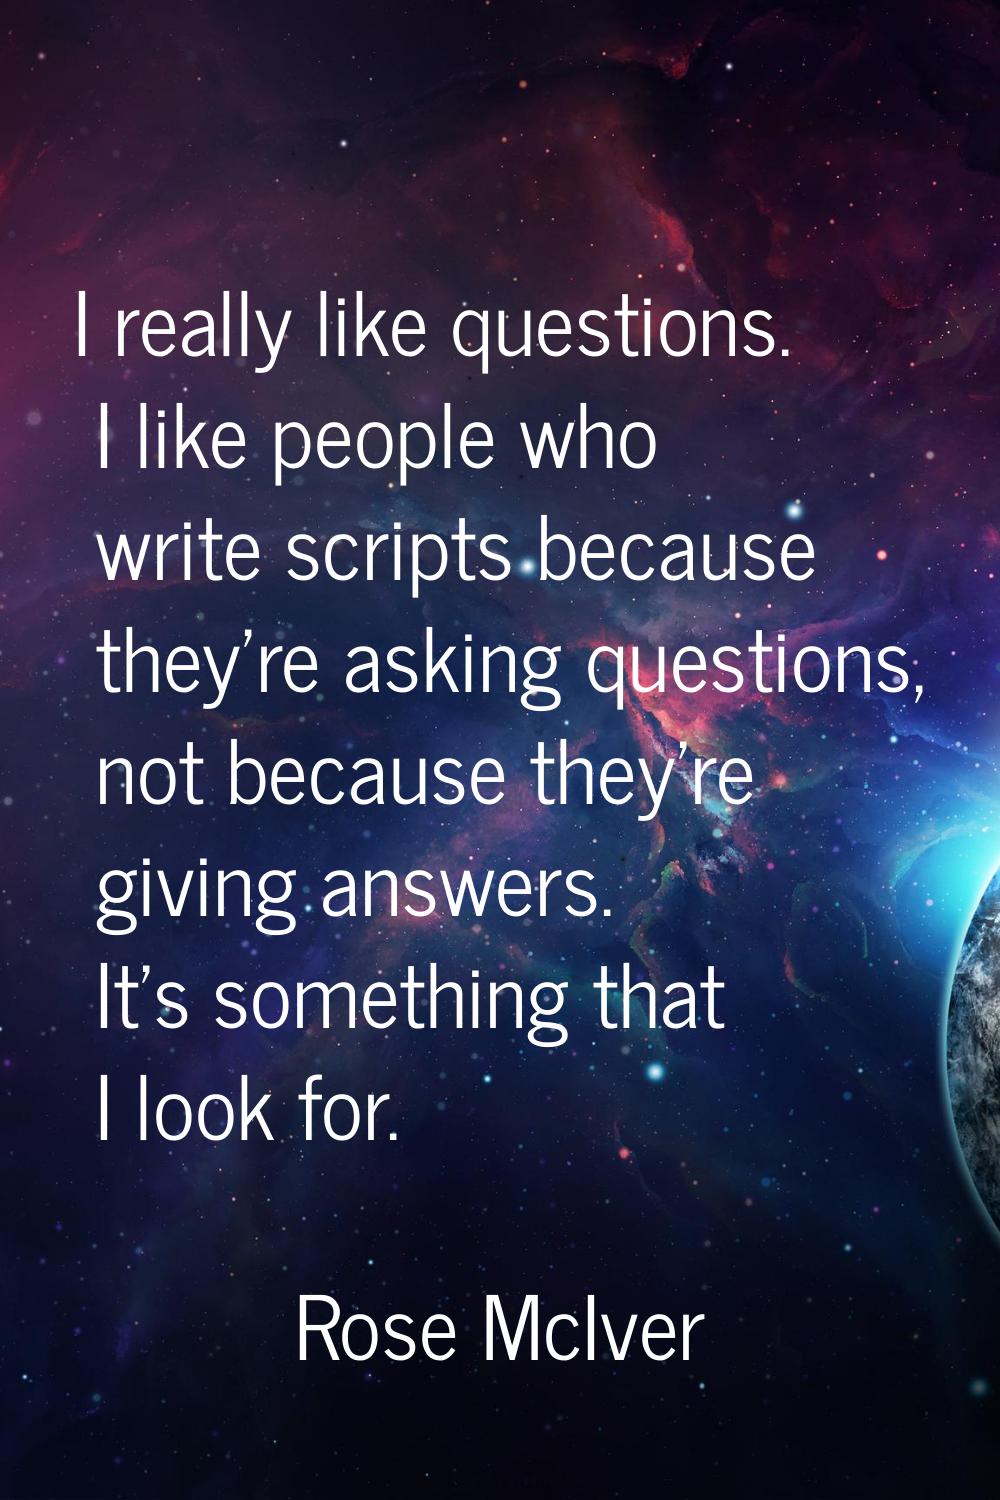 I really like questions. I like people who write scripts because they're asking questions, not beca